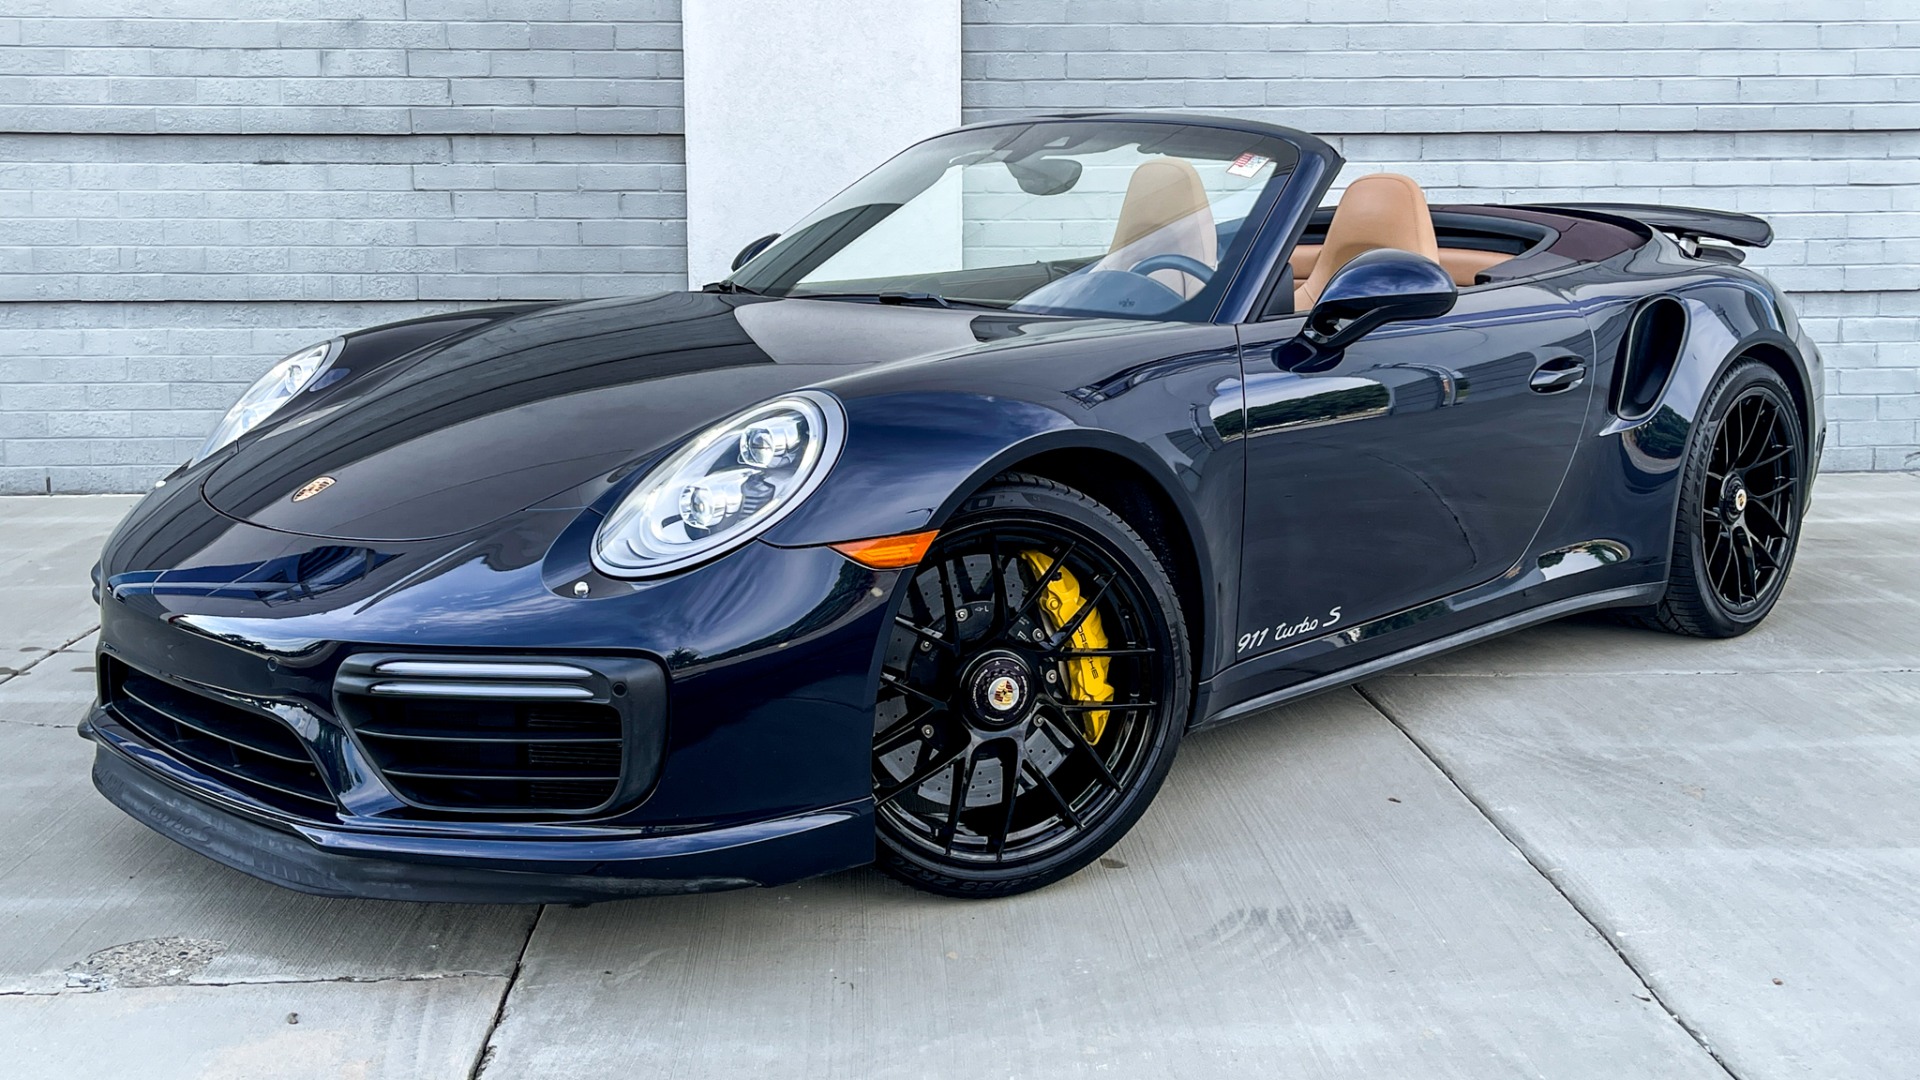 Used 2017 Porsche 911 Turbo S / CABRIOLET / FRONT LIFT / PDK / 20IN WHEELS for sale $179,999 at Formula Imports in Charlotte NC 28227 1